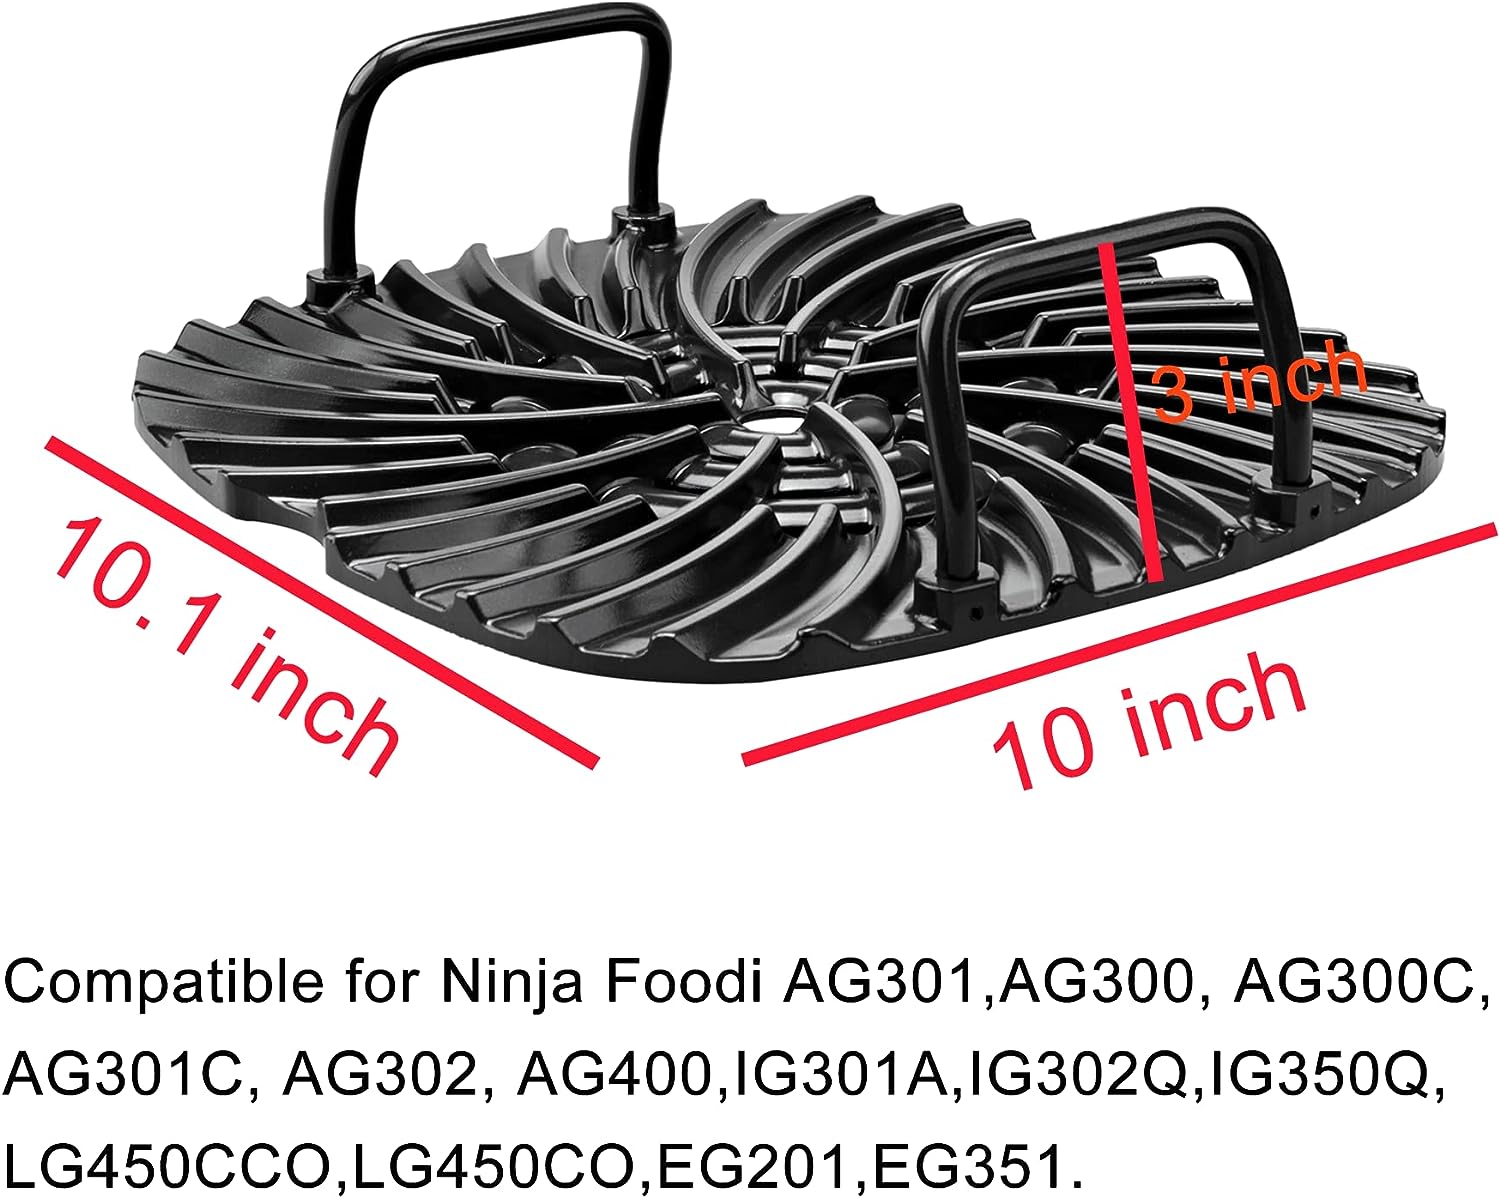 Ninja Eg201 Vs Ag301 Foodi Grill: Which One Is Better for You?